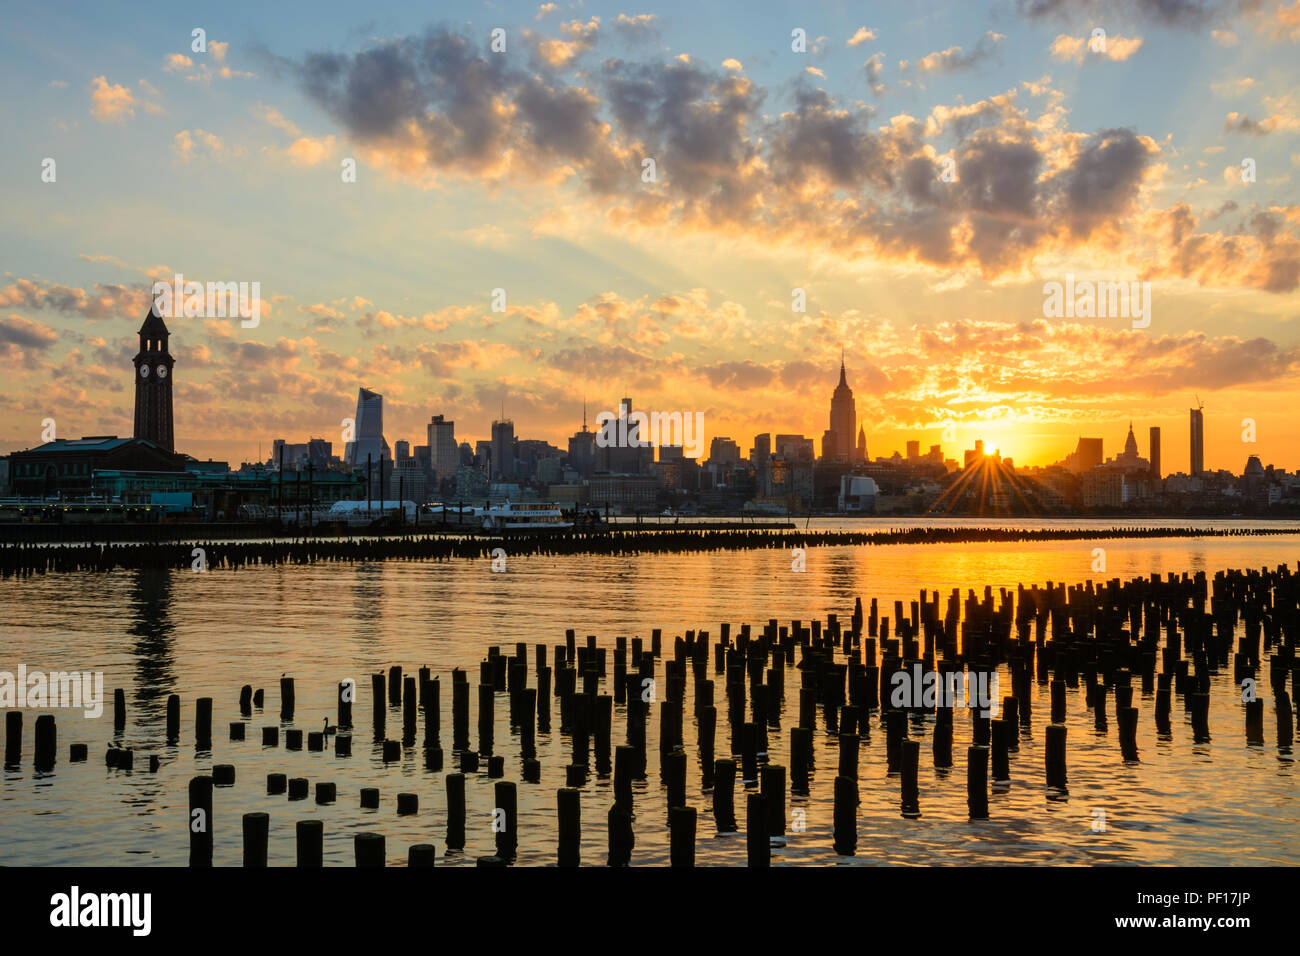 The sun rises over the New York City skyline as seen from the Hoboken, New Jersey waterfront. Stock Photo